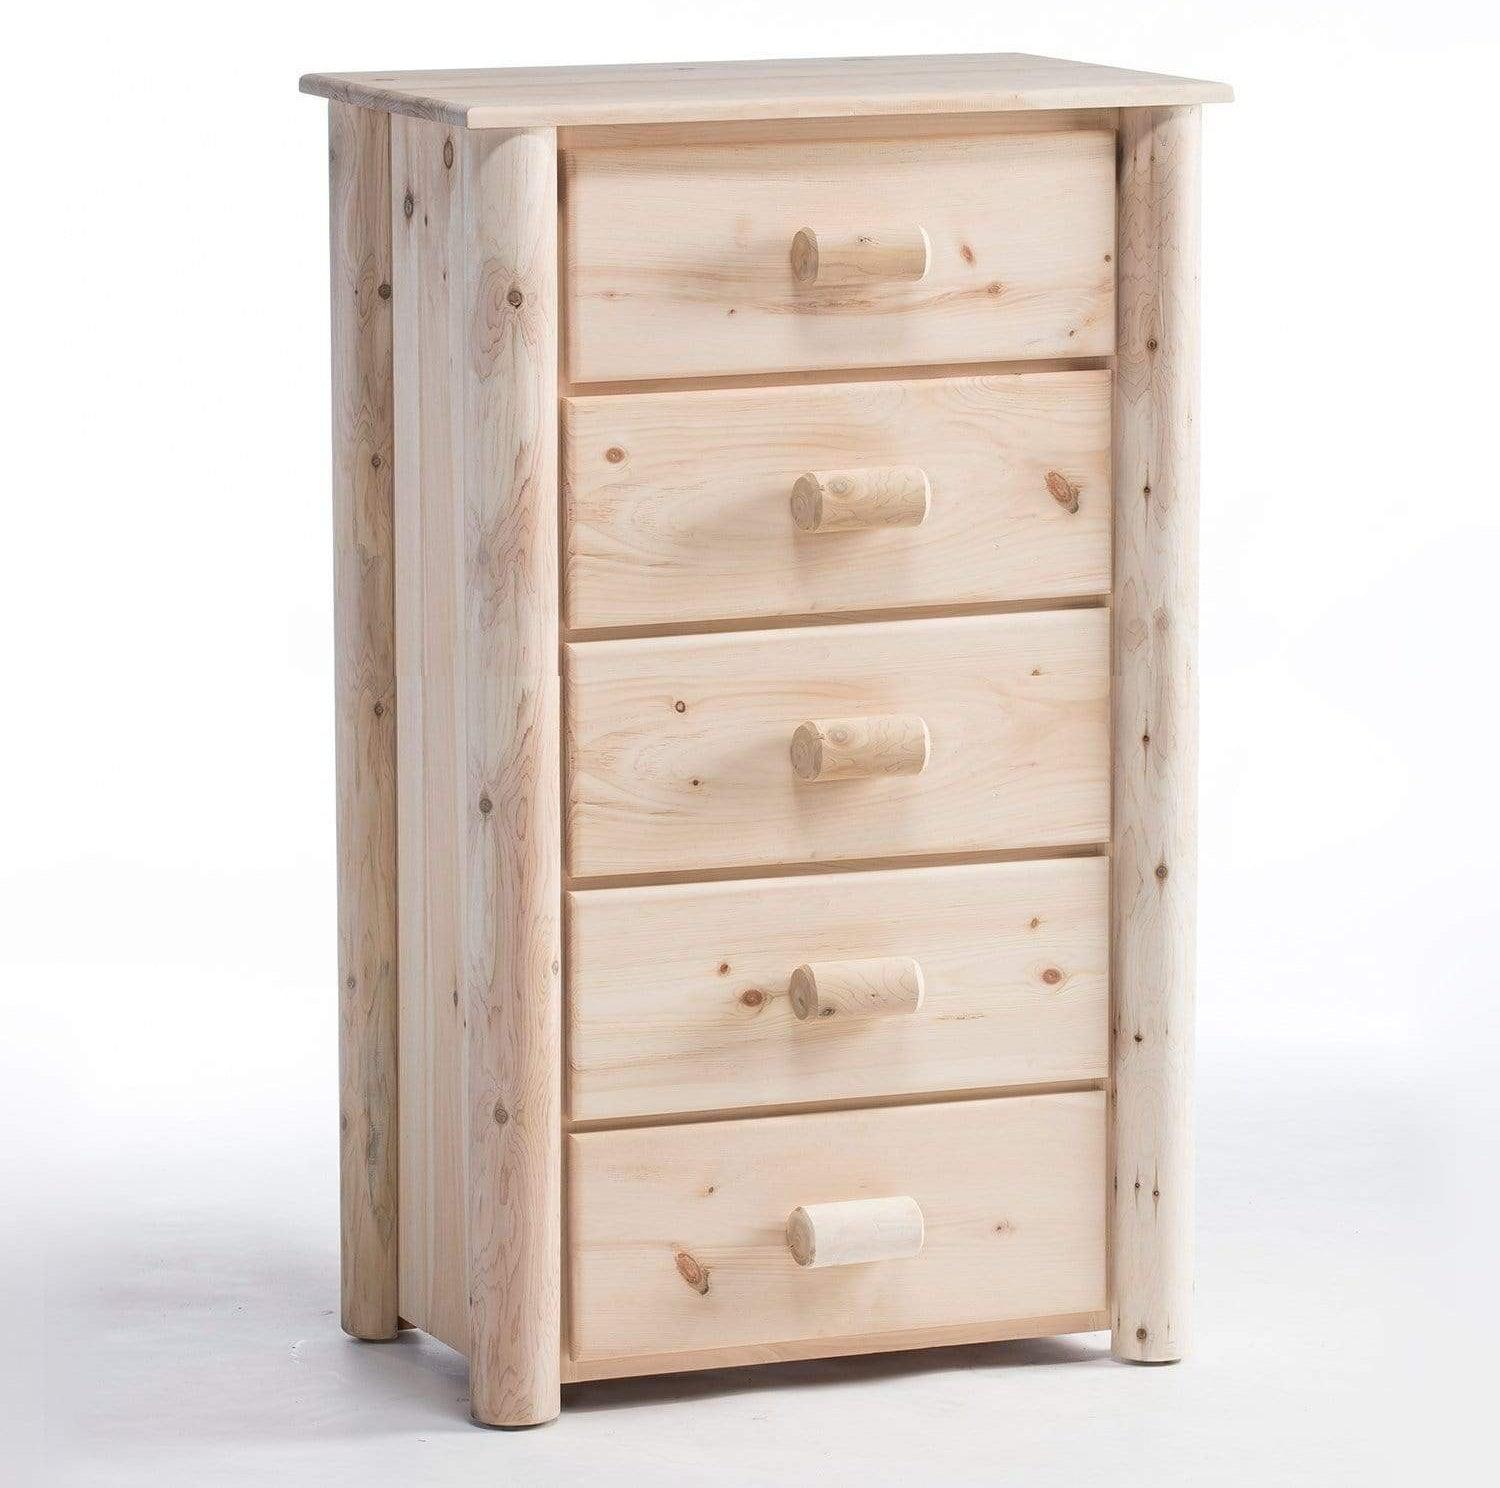 Lakeland Mills Frontier 5 Drawer Rustic Chest-Rustic Furniture Marketplace